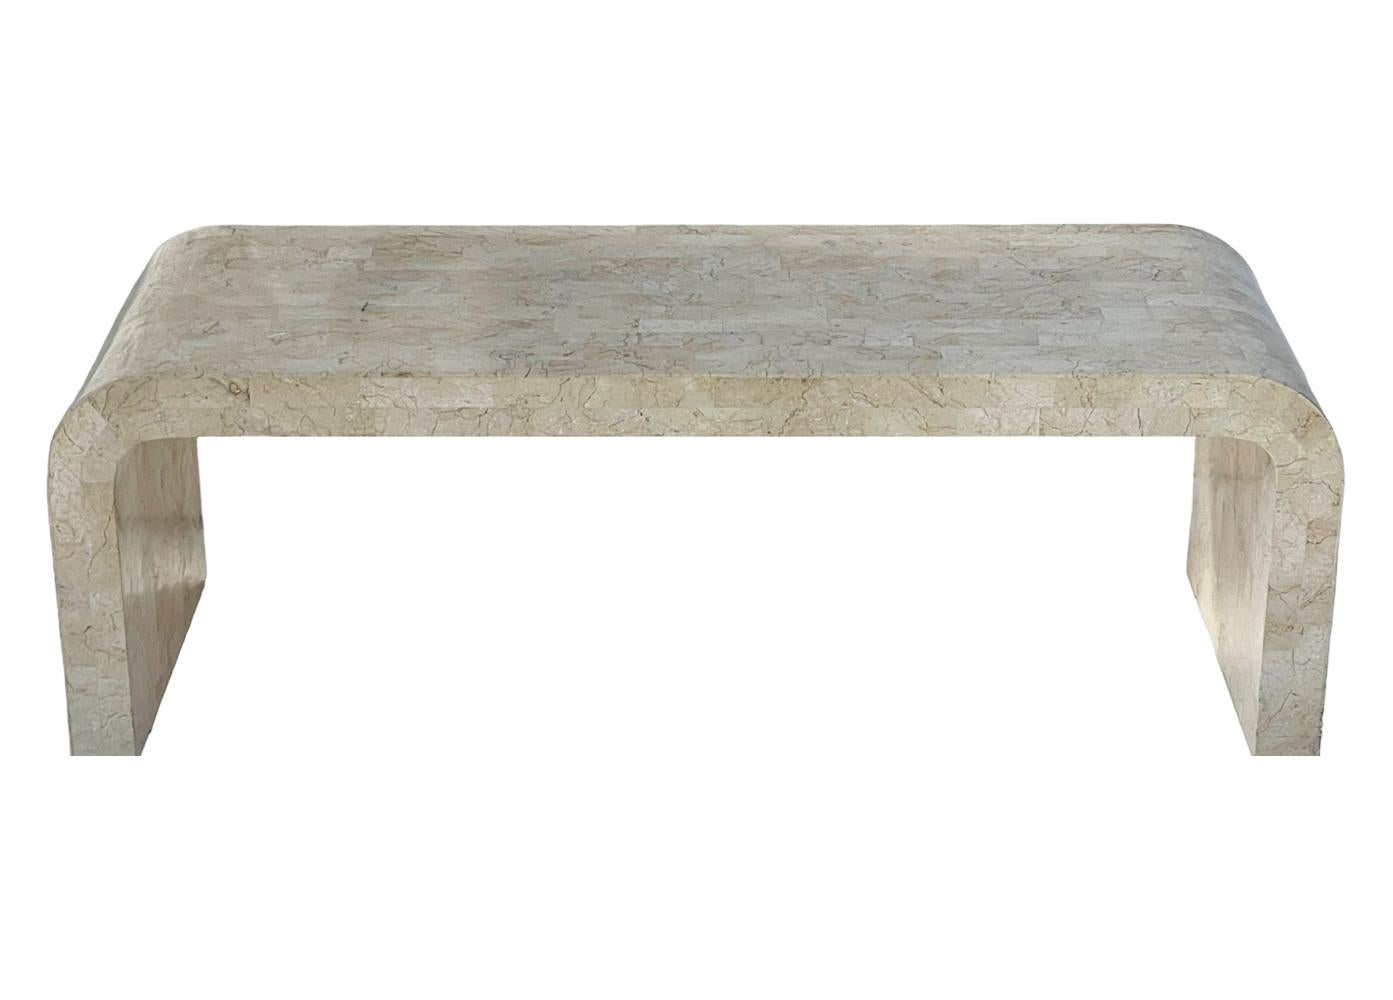 A classic waterfall form coffee table straight out of the 1980's. It features a tessellated stone finish in a cream colored marble. 